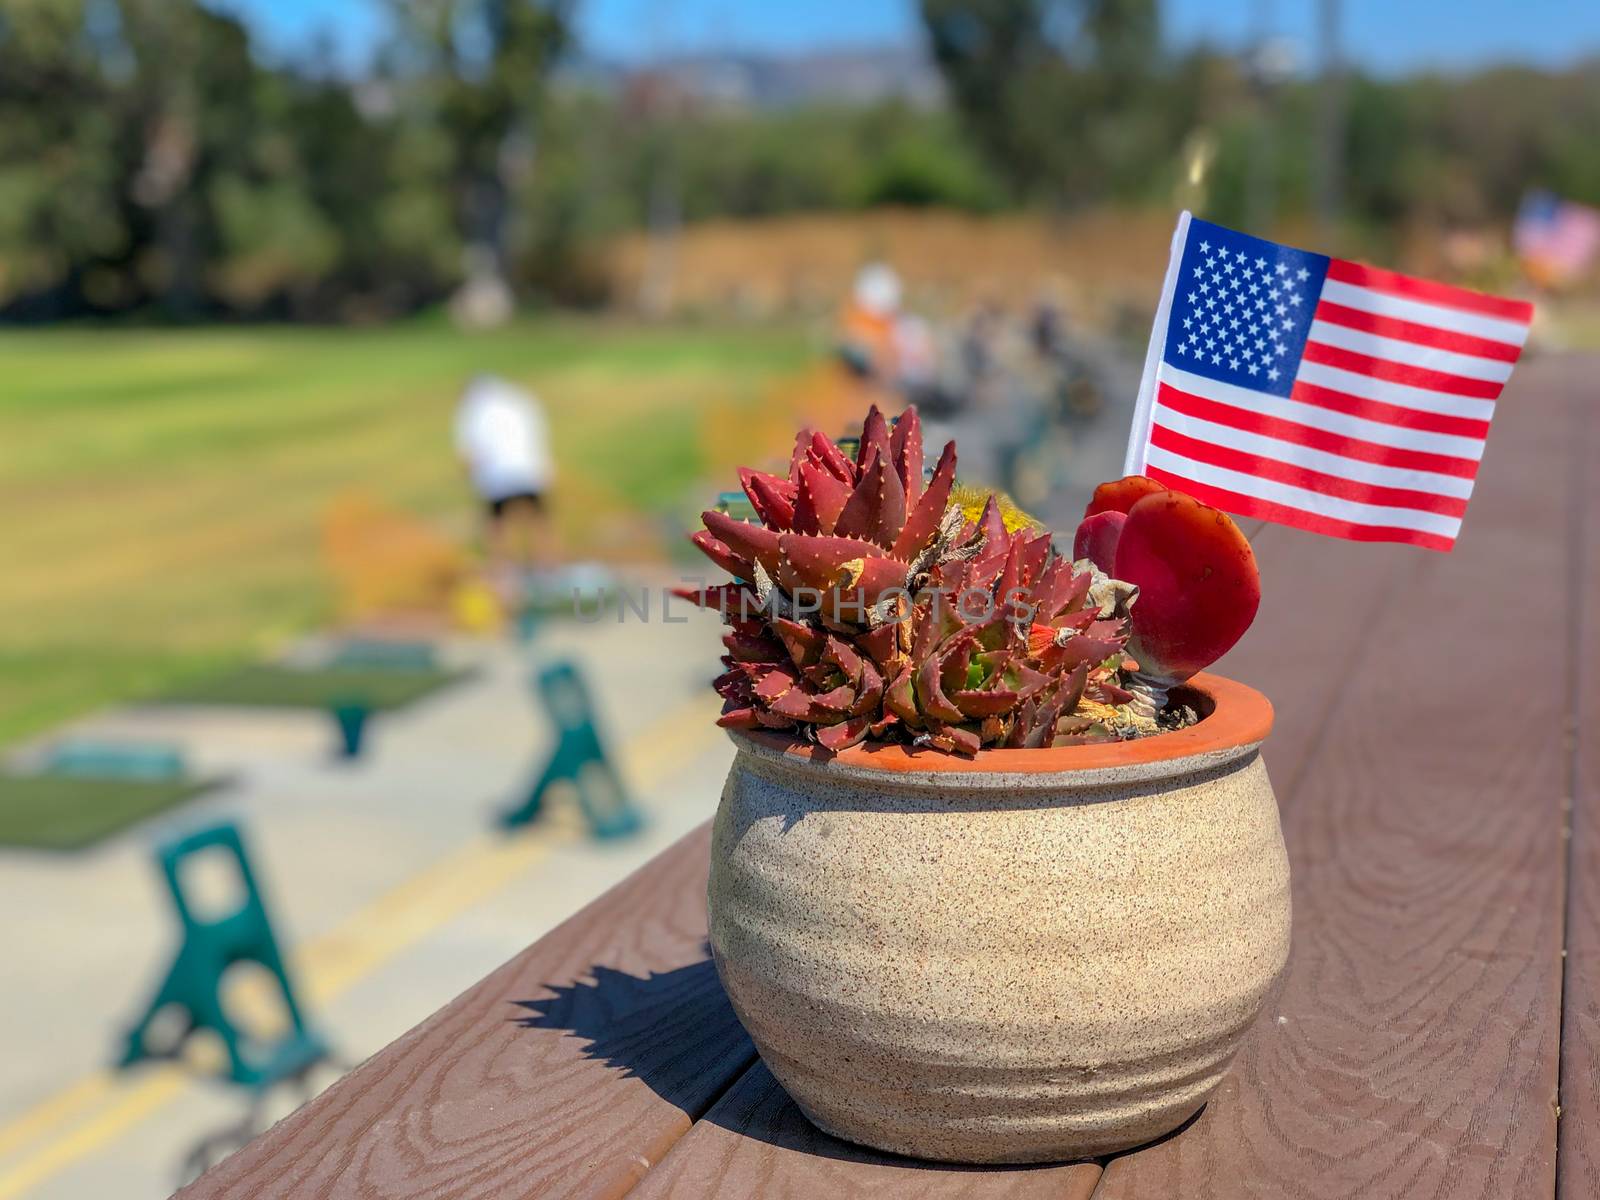 Patriotic flower pot with American flags and golfer on the background. American flag decoration.